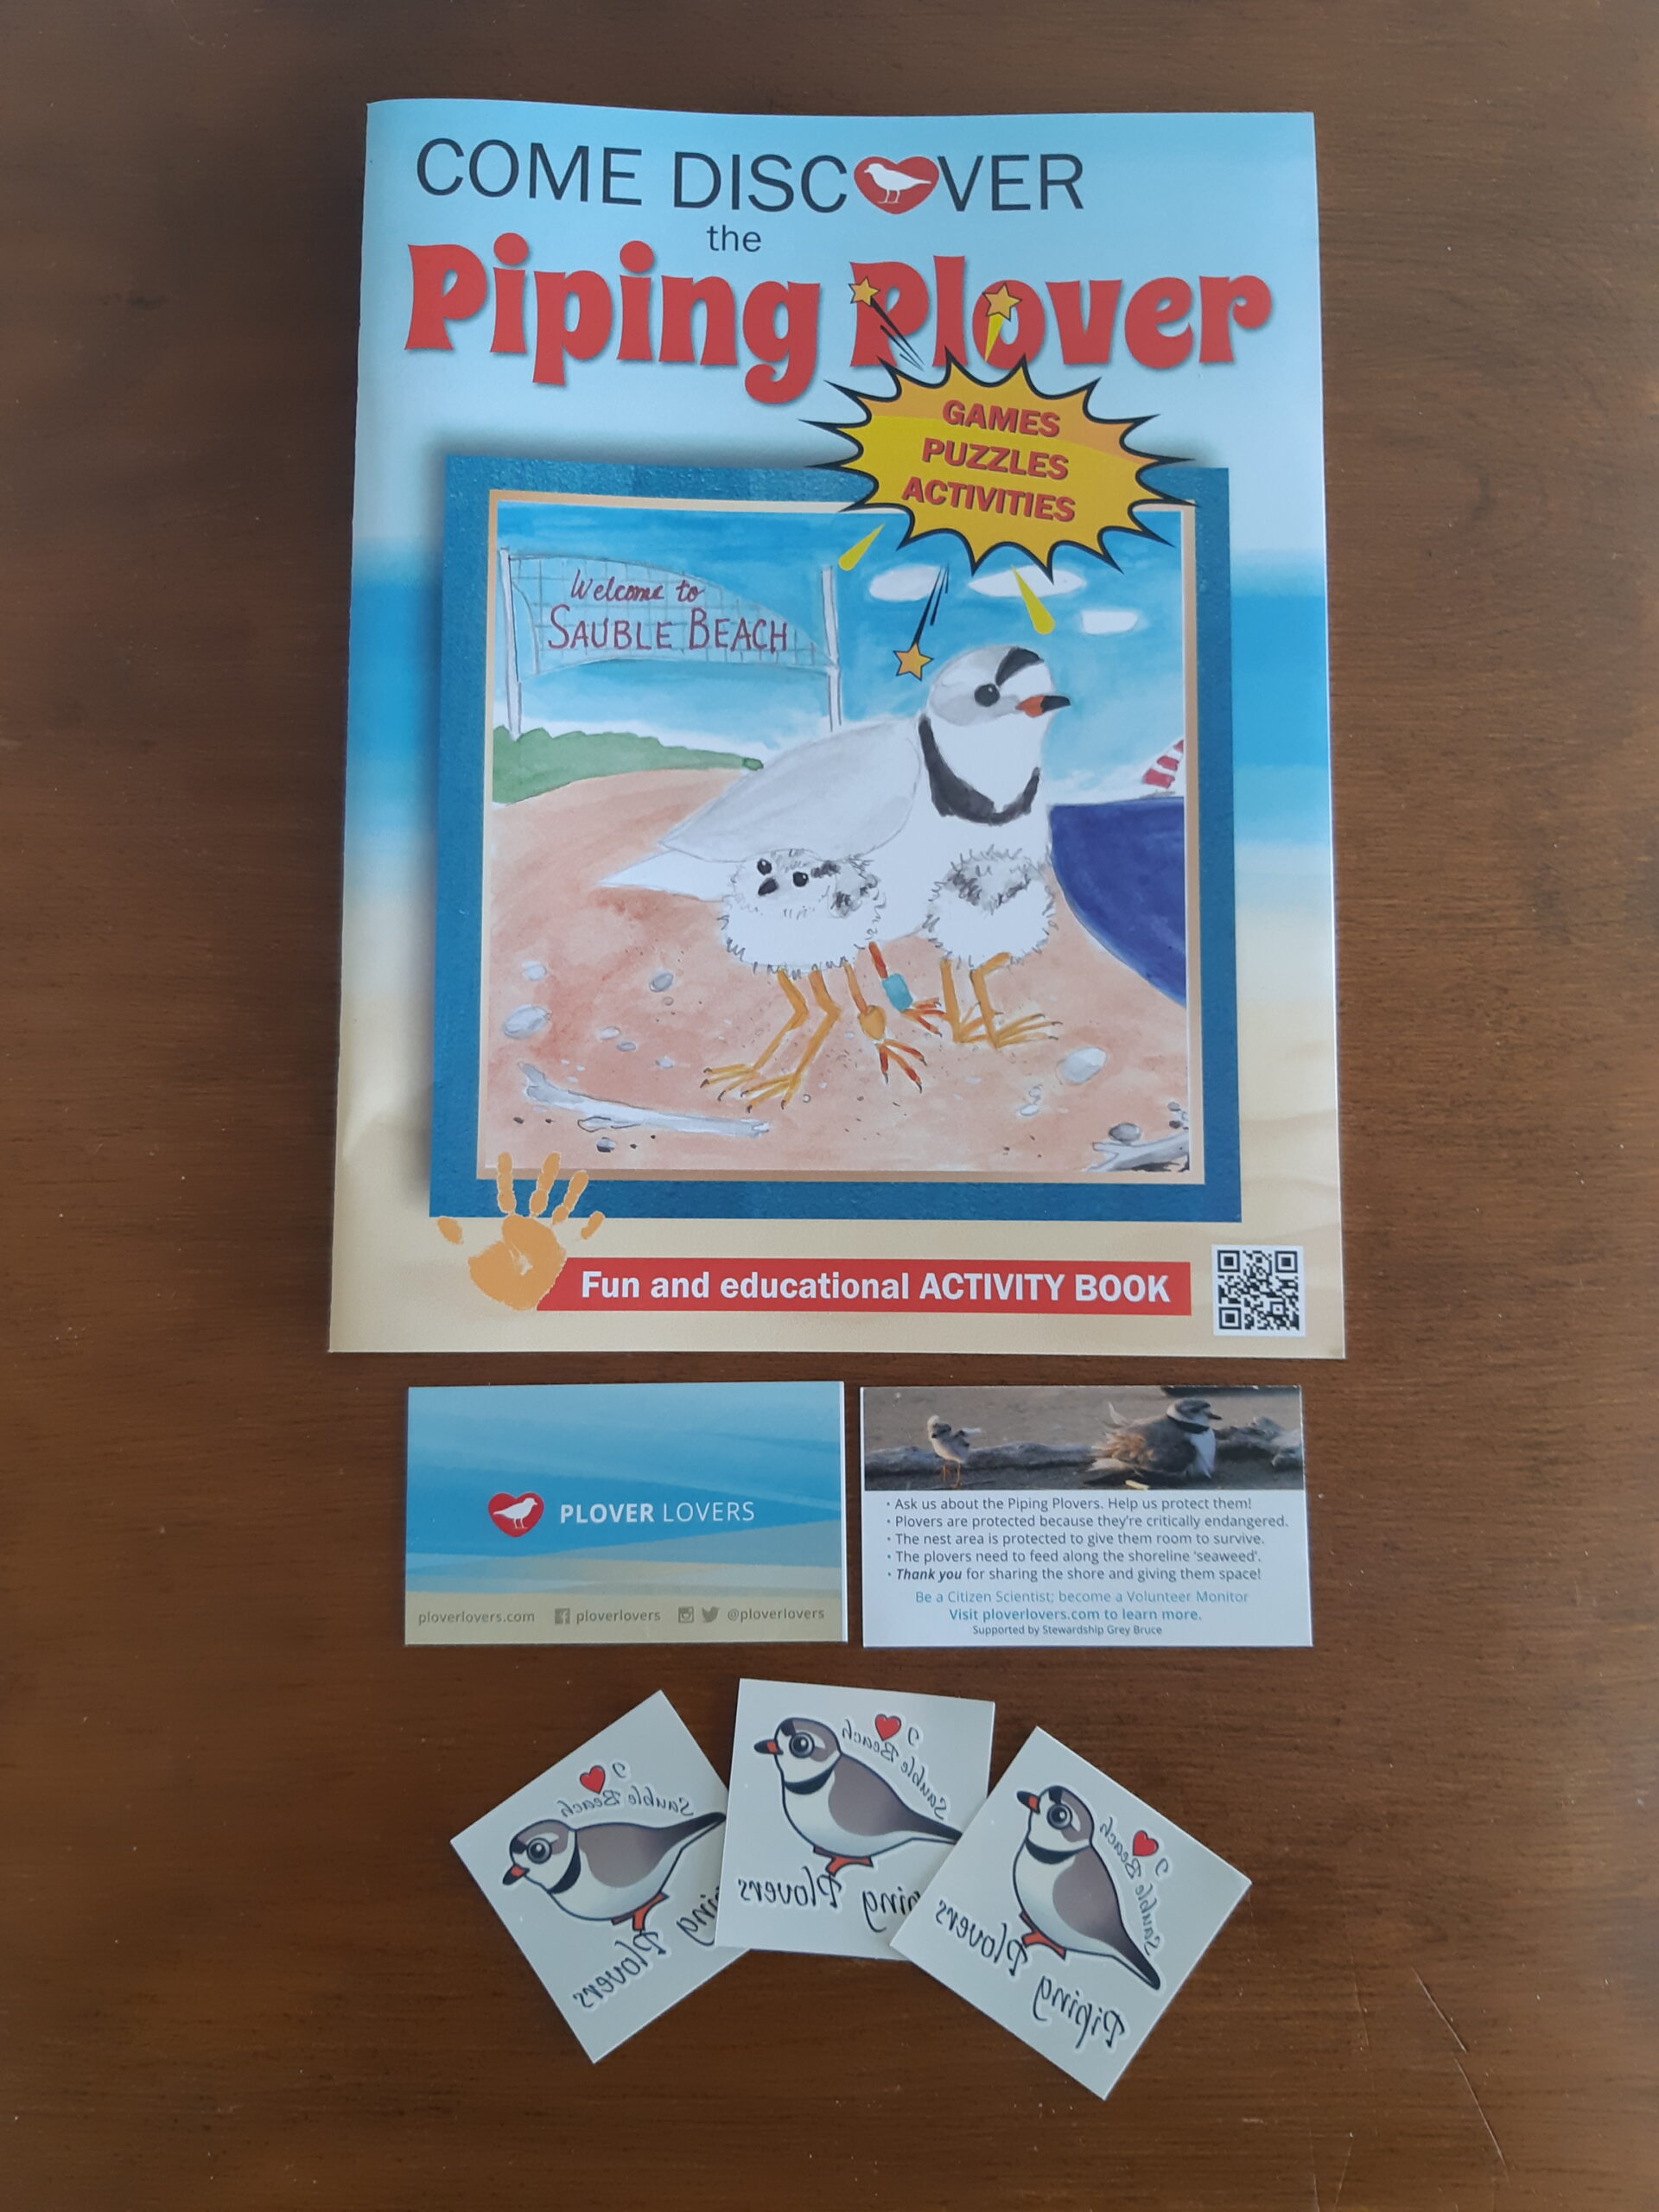 An educational activity book about piping plovers.